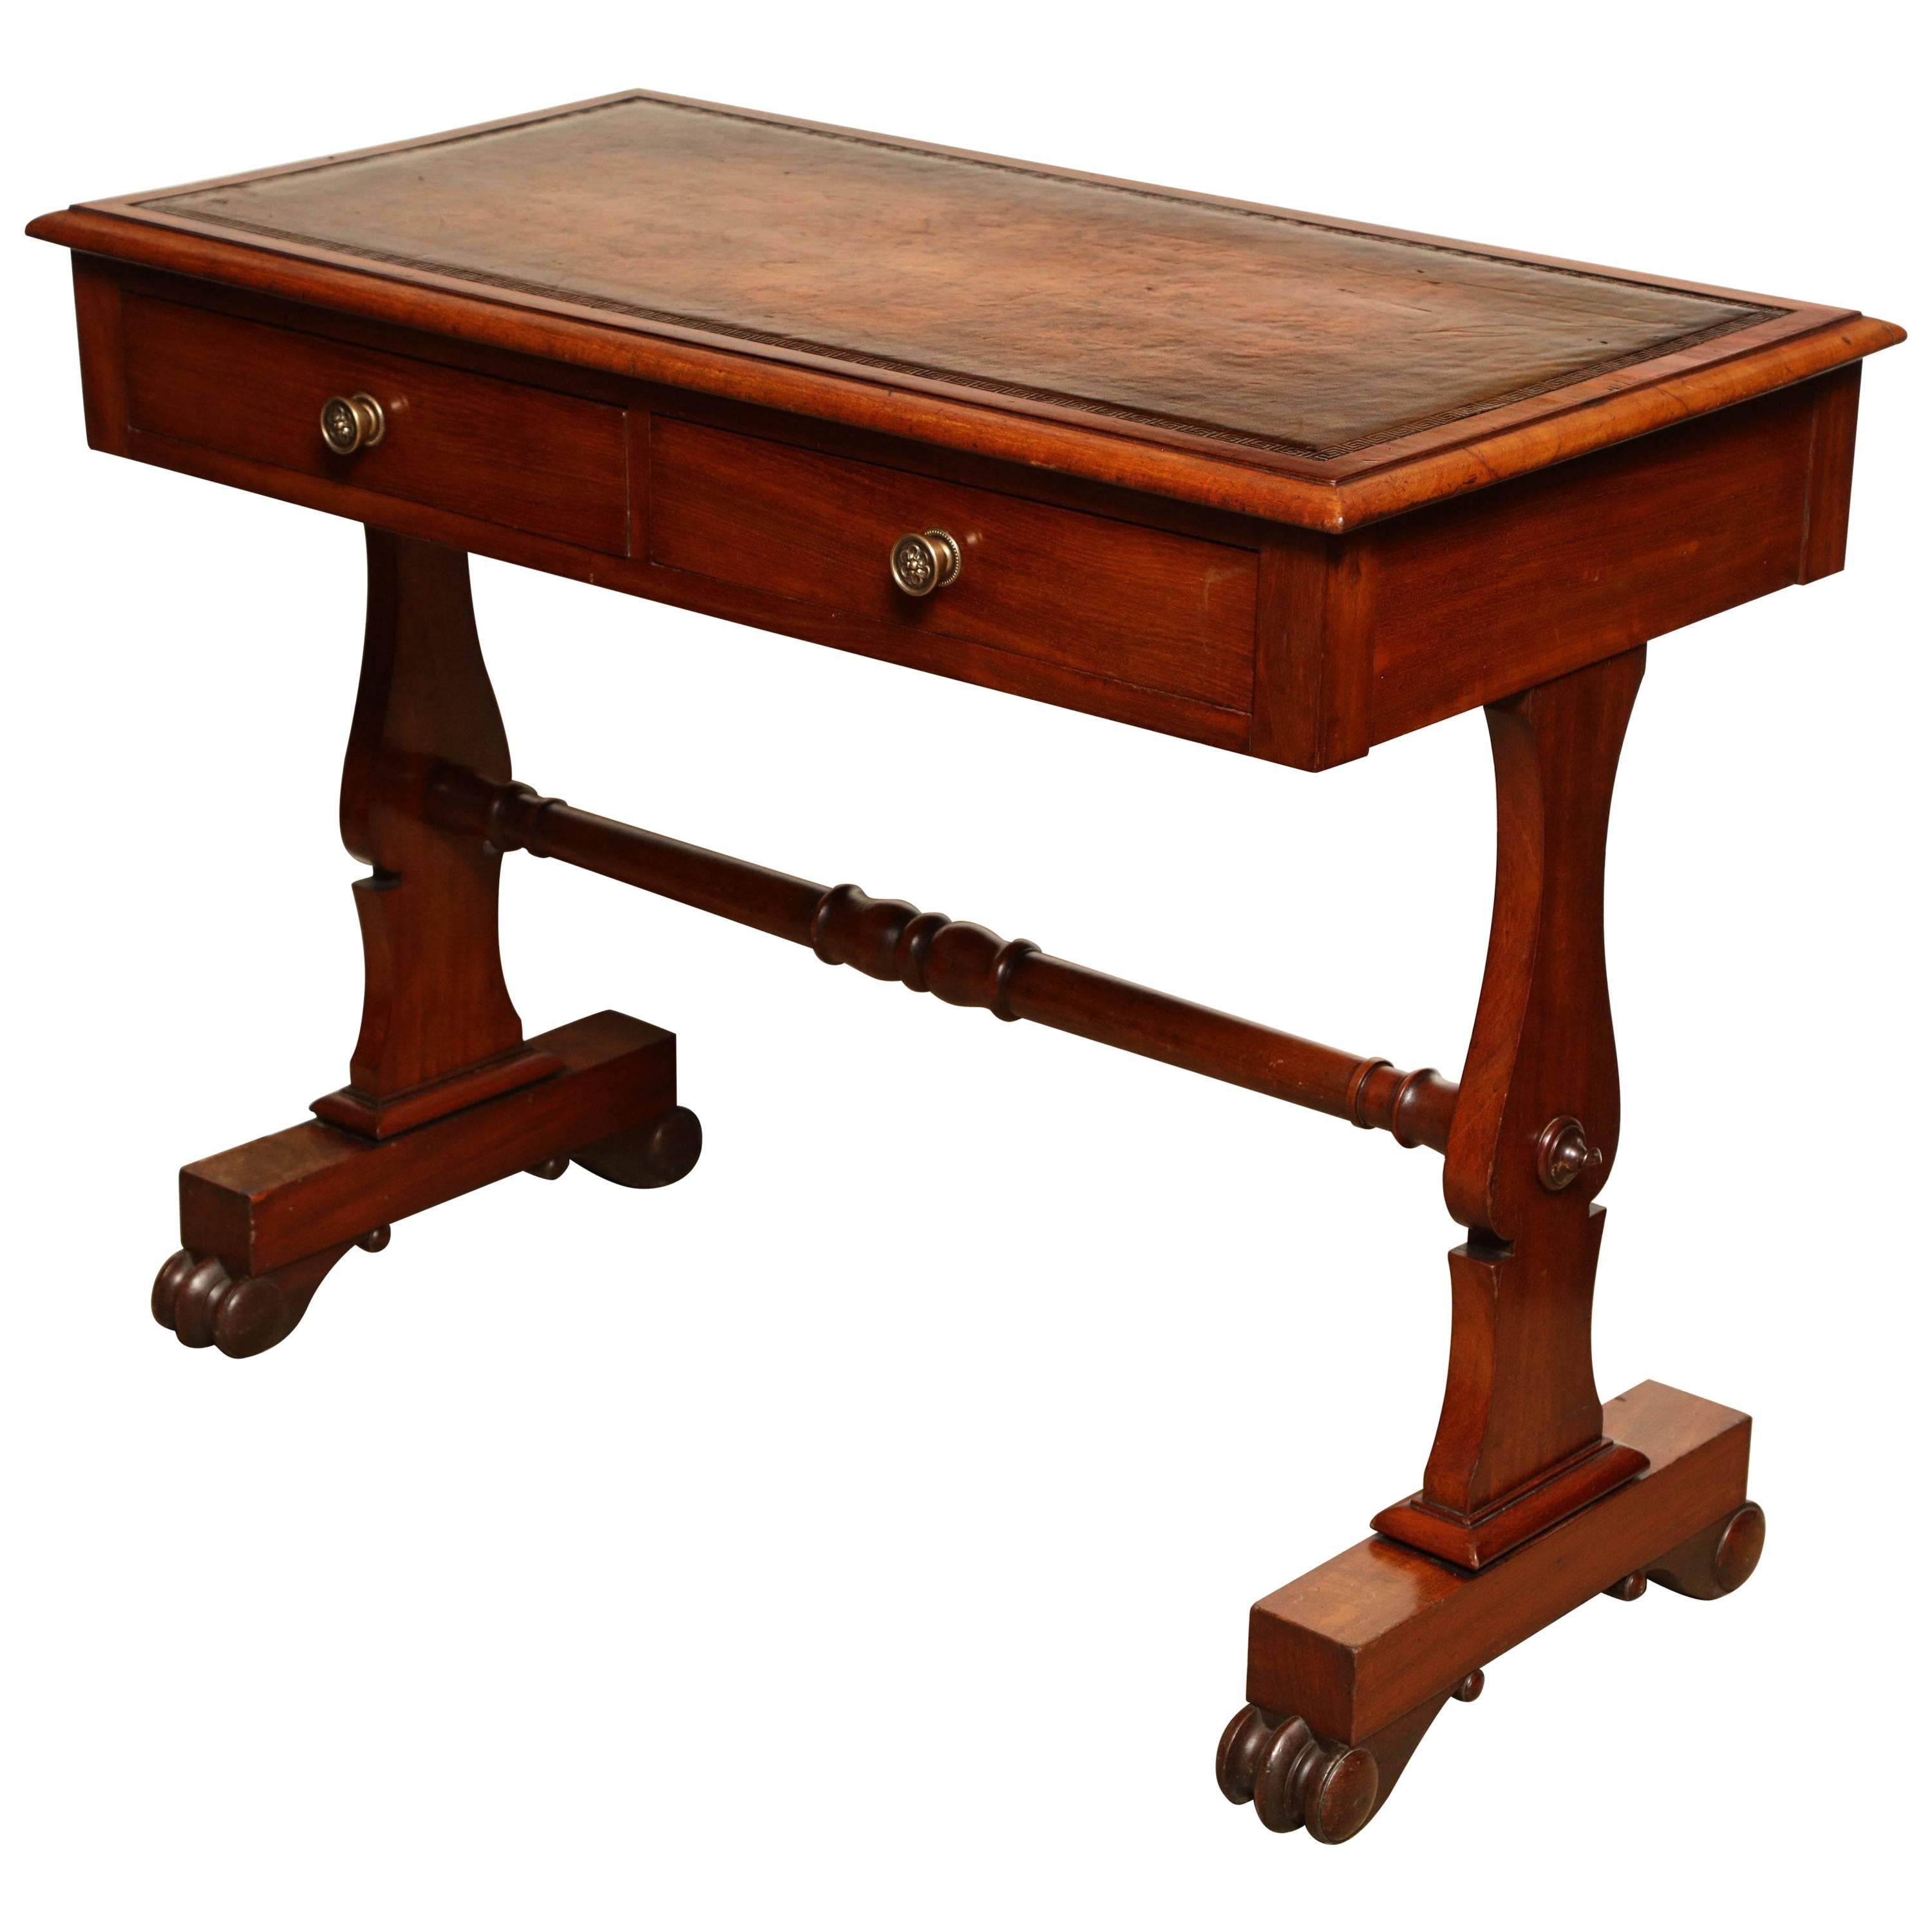 Mid-19th Century English, Mahogany and Leather Top Desk